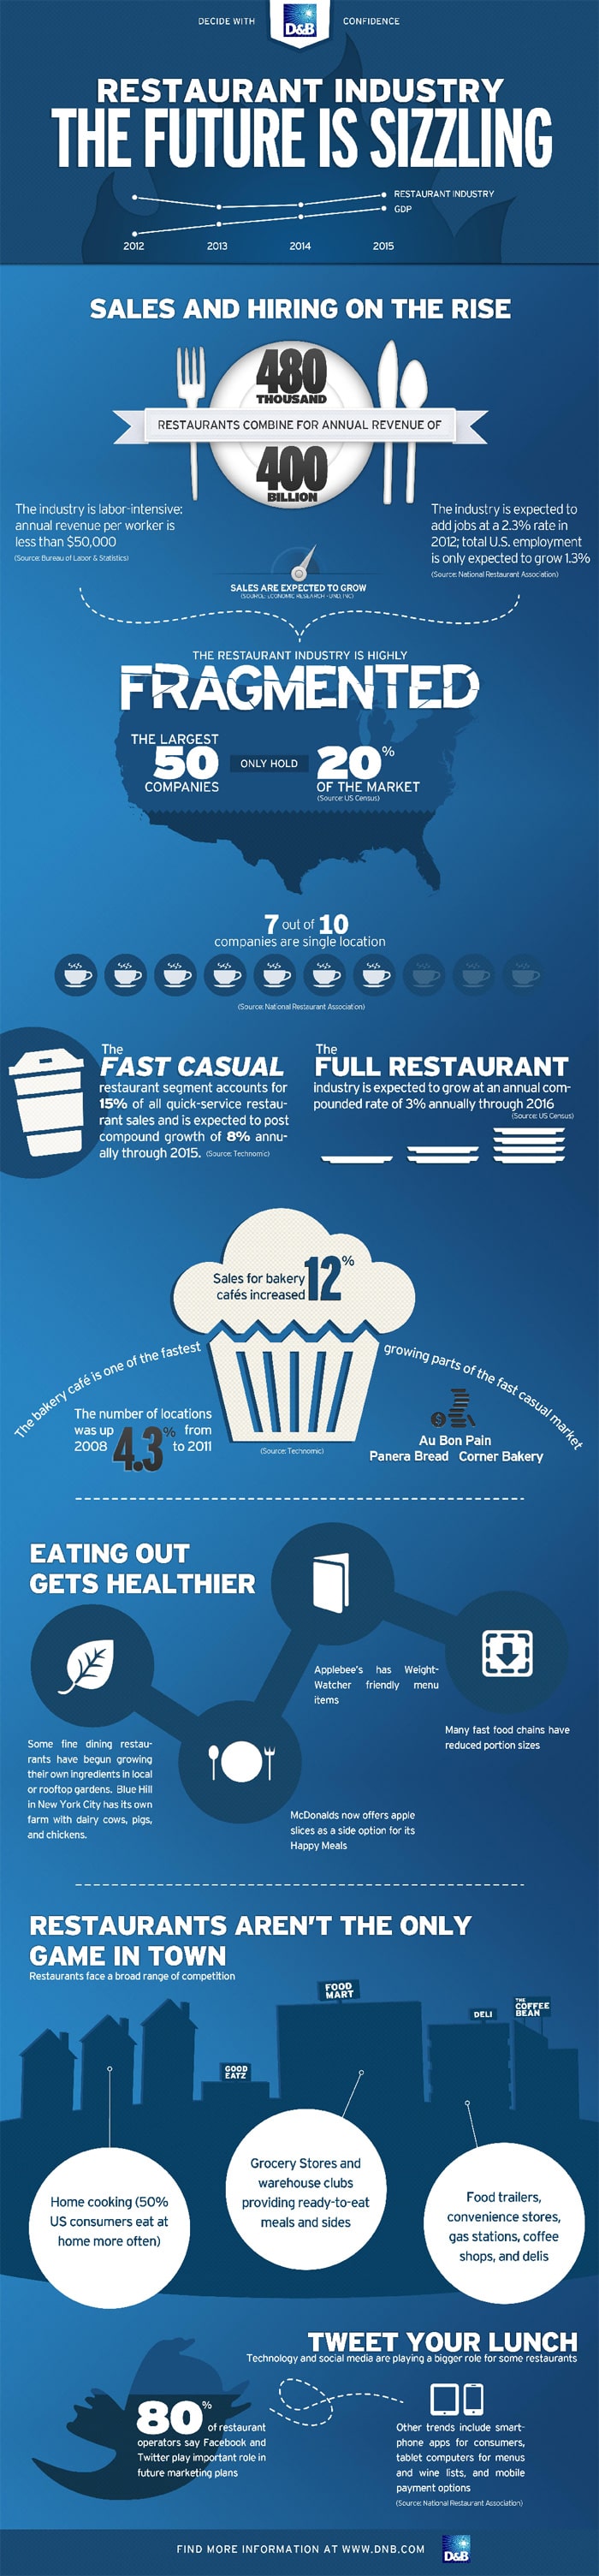 Restaurant Industry Facts